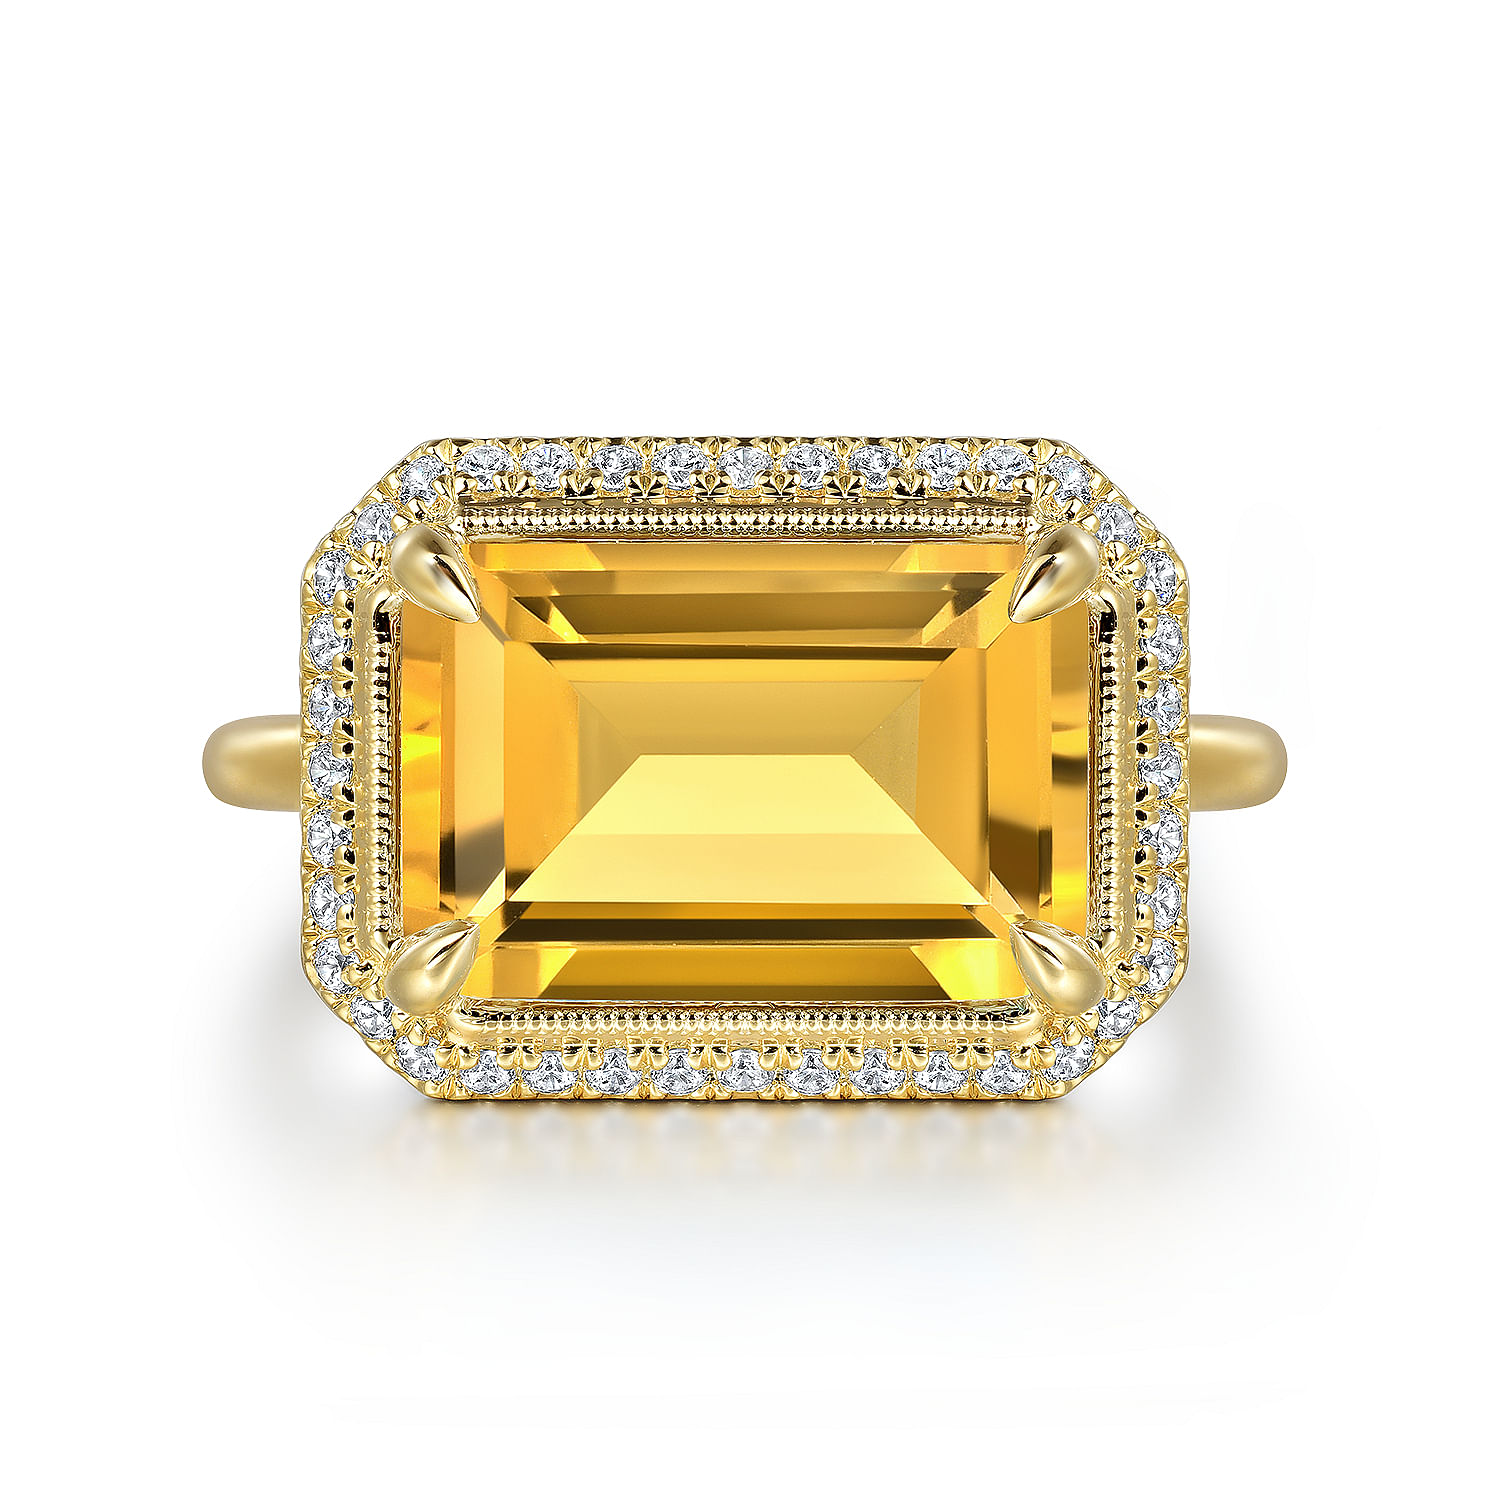 14K Yellow Gold Diamond and Citrine Emerald Cut Ladies Ring With Flower Pattern Gallery